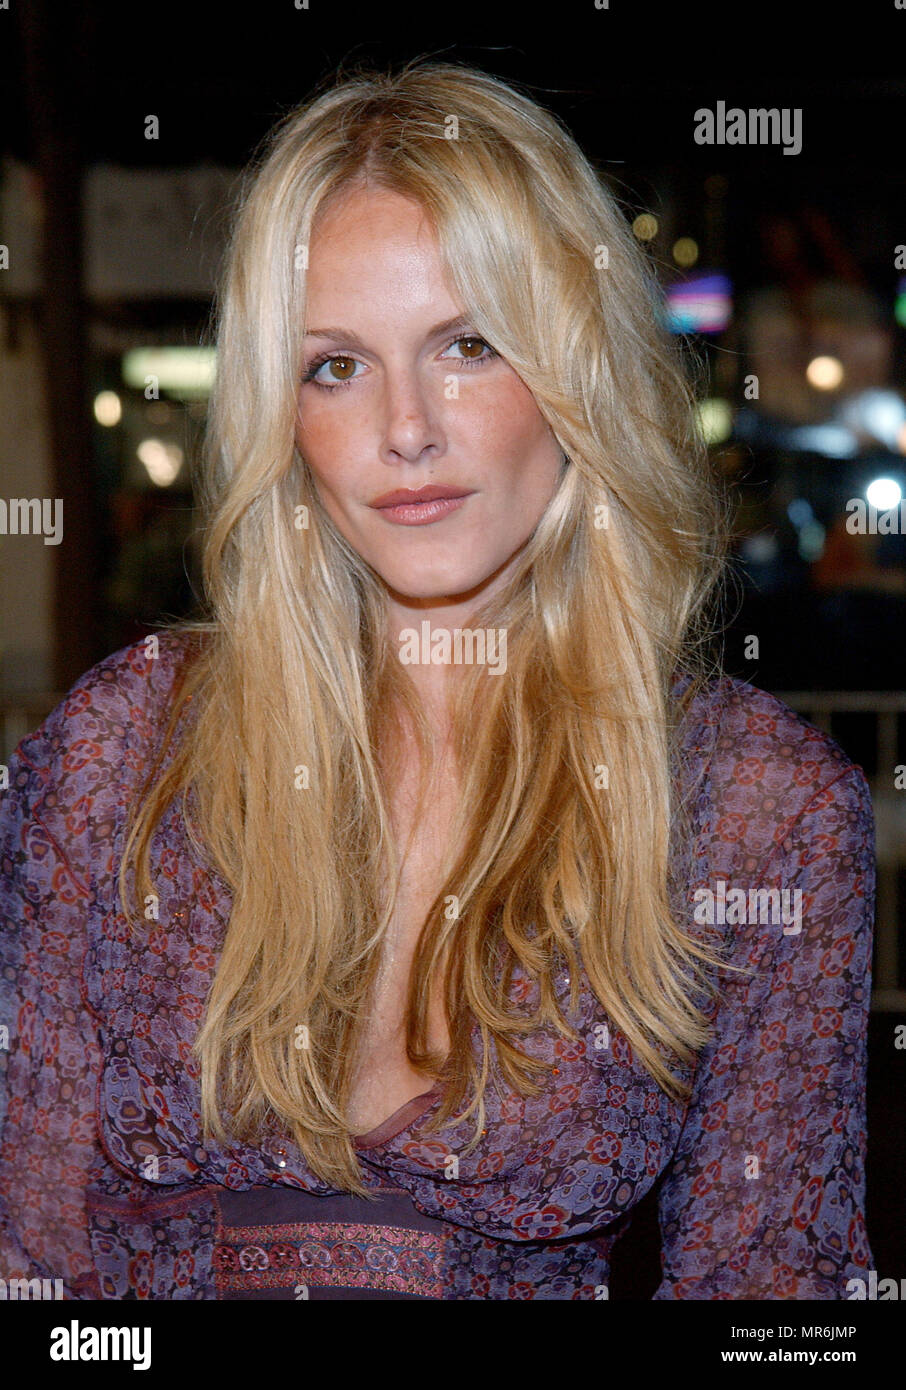 Monet Mazur arriving at The premiere of The RING  at the Bruin Theatre in Los Angeles. October 9, 2002. MazurMonet87 Red Carpet Event, Vertical, USA, Film Industry, Celebrities,  Photography, Bestof, Arts Culture and Entertainment, Topix Celebrities fashion /  Vertical, Best of, Event in Hollywood Life - California,  Red Carpet and backstage, USA, Film Industry, Celebrities,  movie celebrities, TV celebrities, Music celebrities, Photography, Bestof, Arts Culture and Entertainment,  Topix, headshot, vertical, one person,, from the year , 2002, inquiry tsuni@Gamma-USA.com Stock Photo